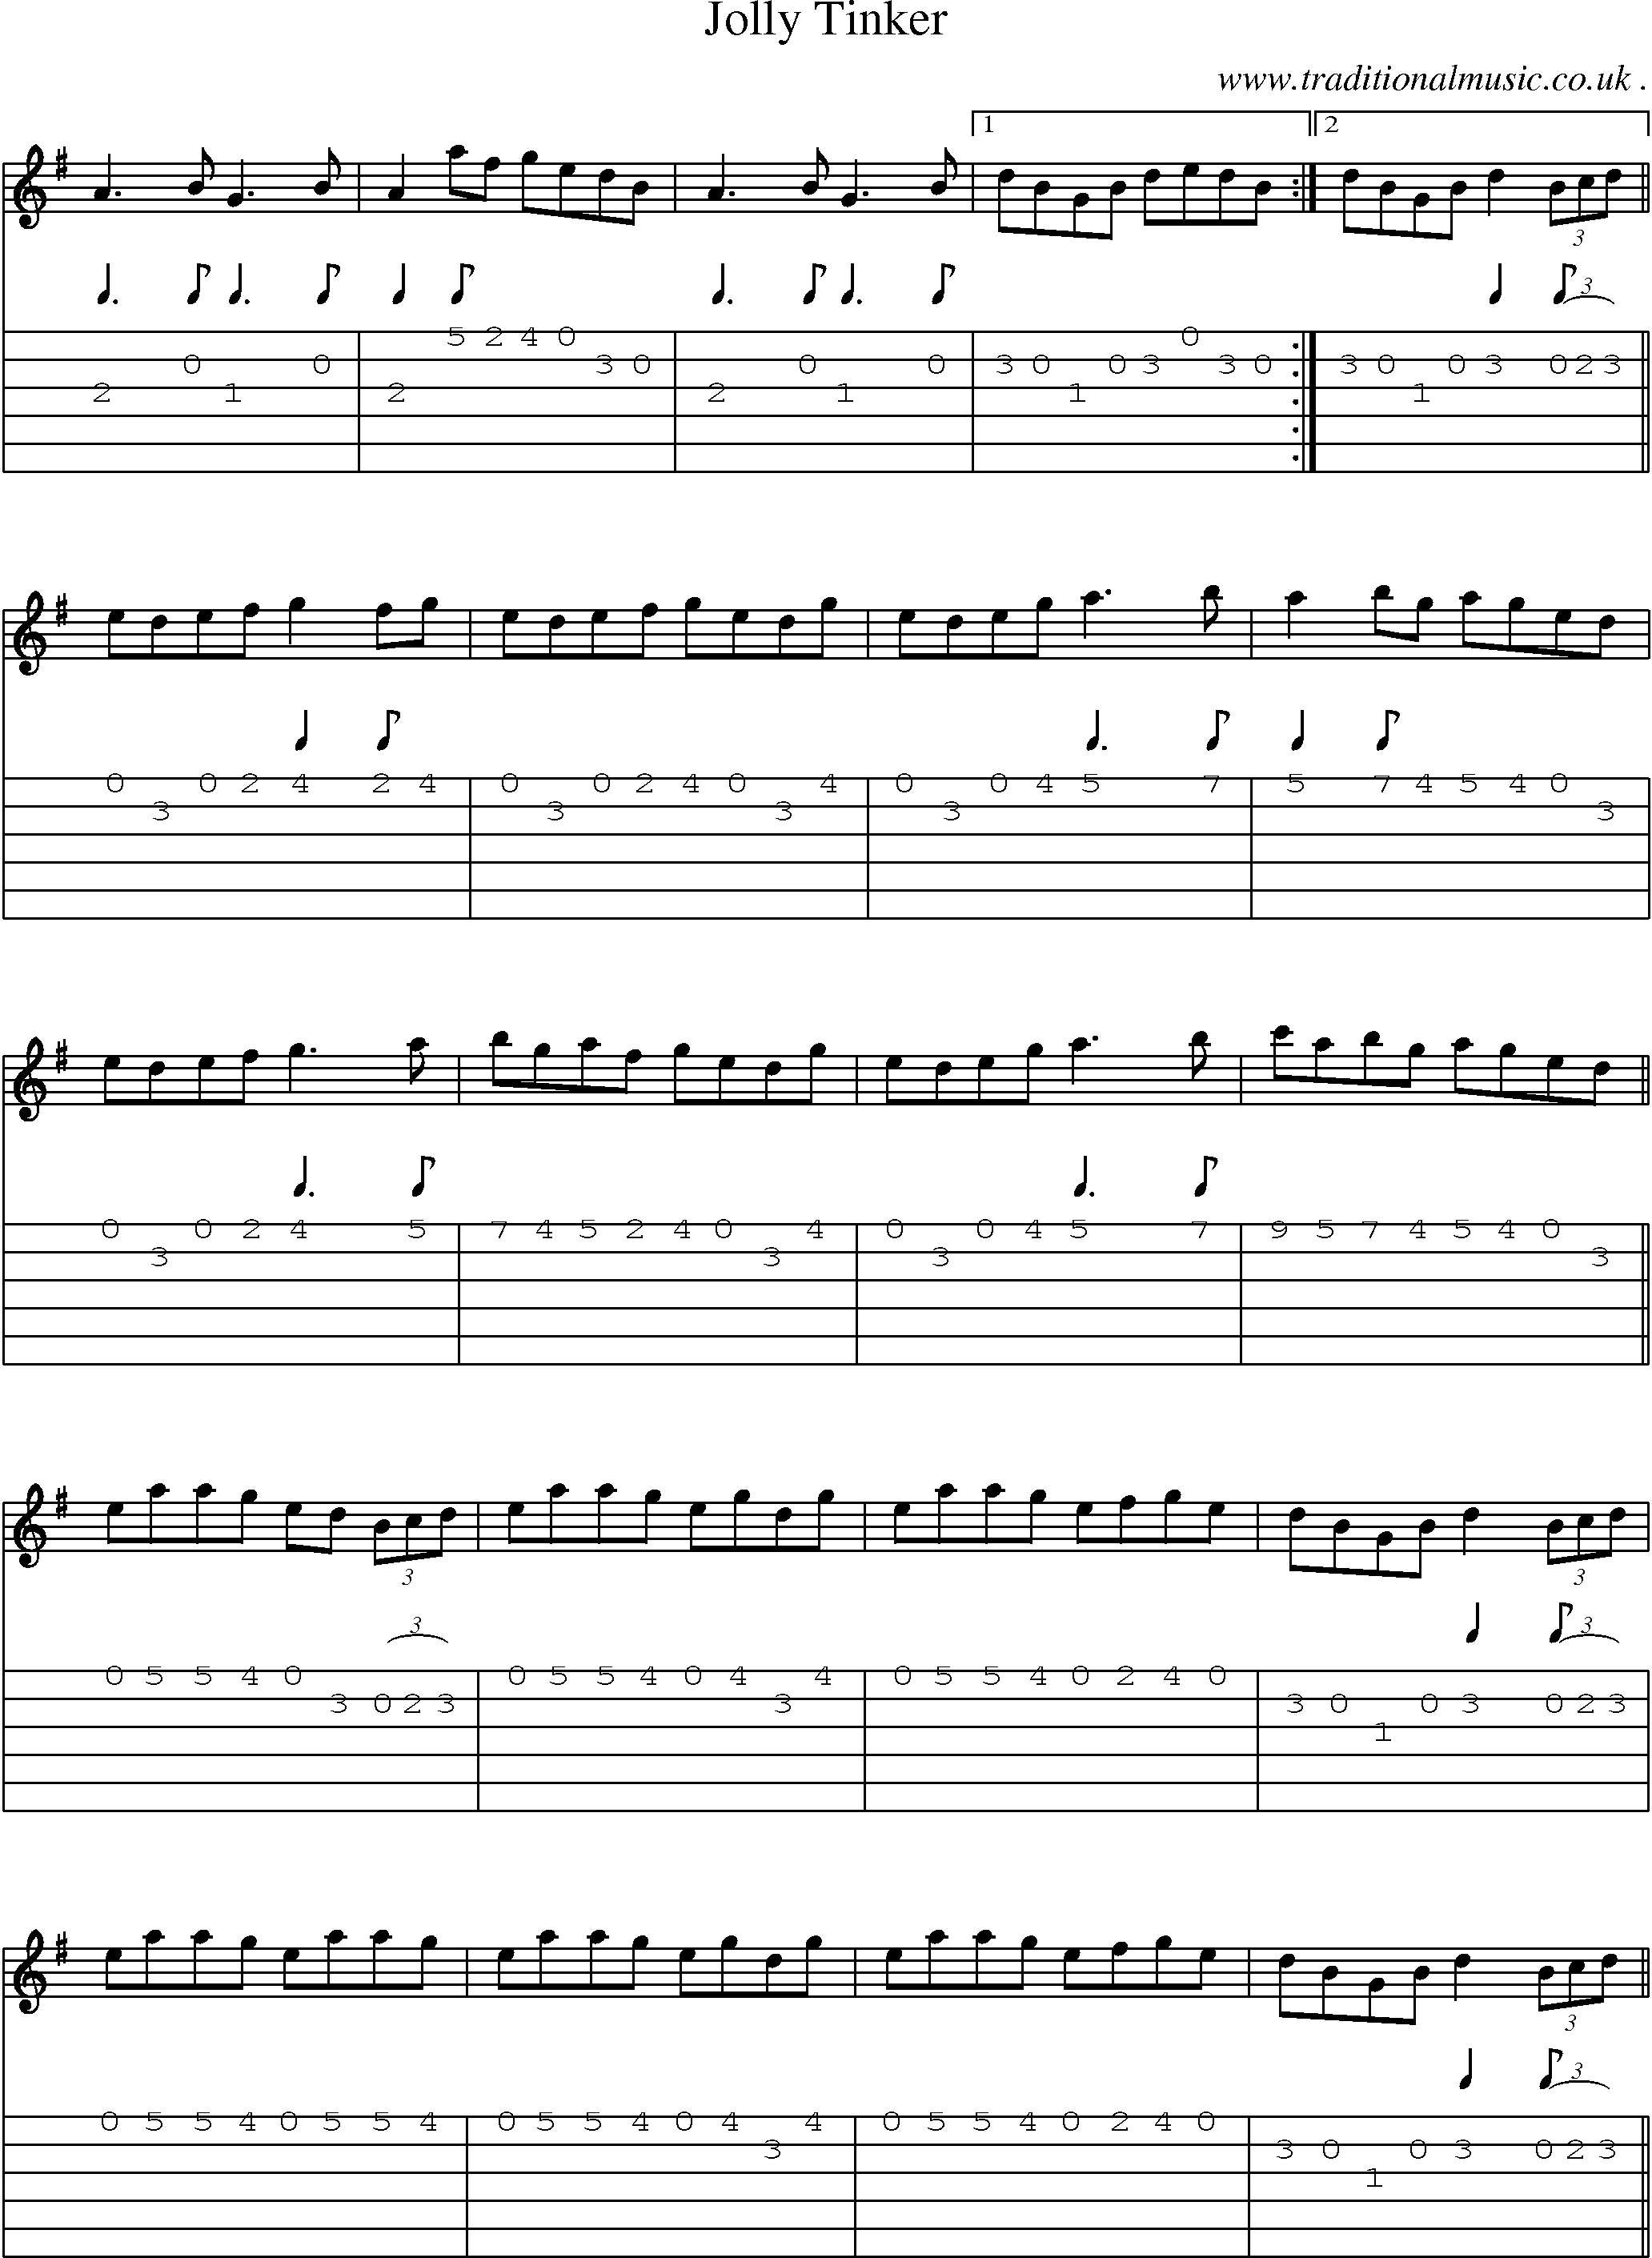 Sheet-Music and Guitar Tabs for Jolly Tinker